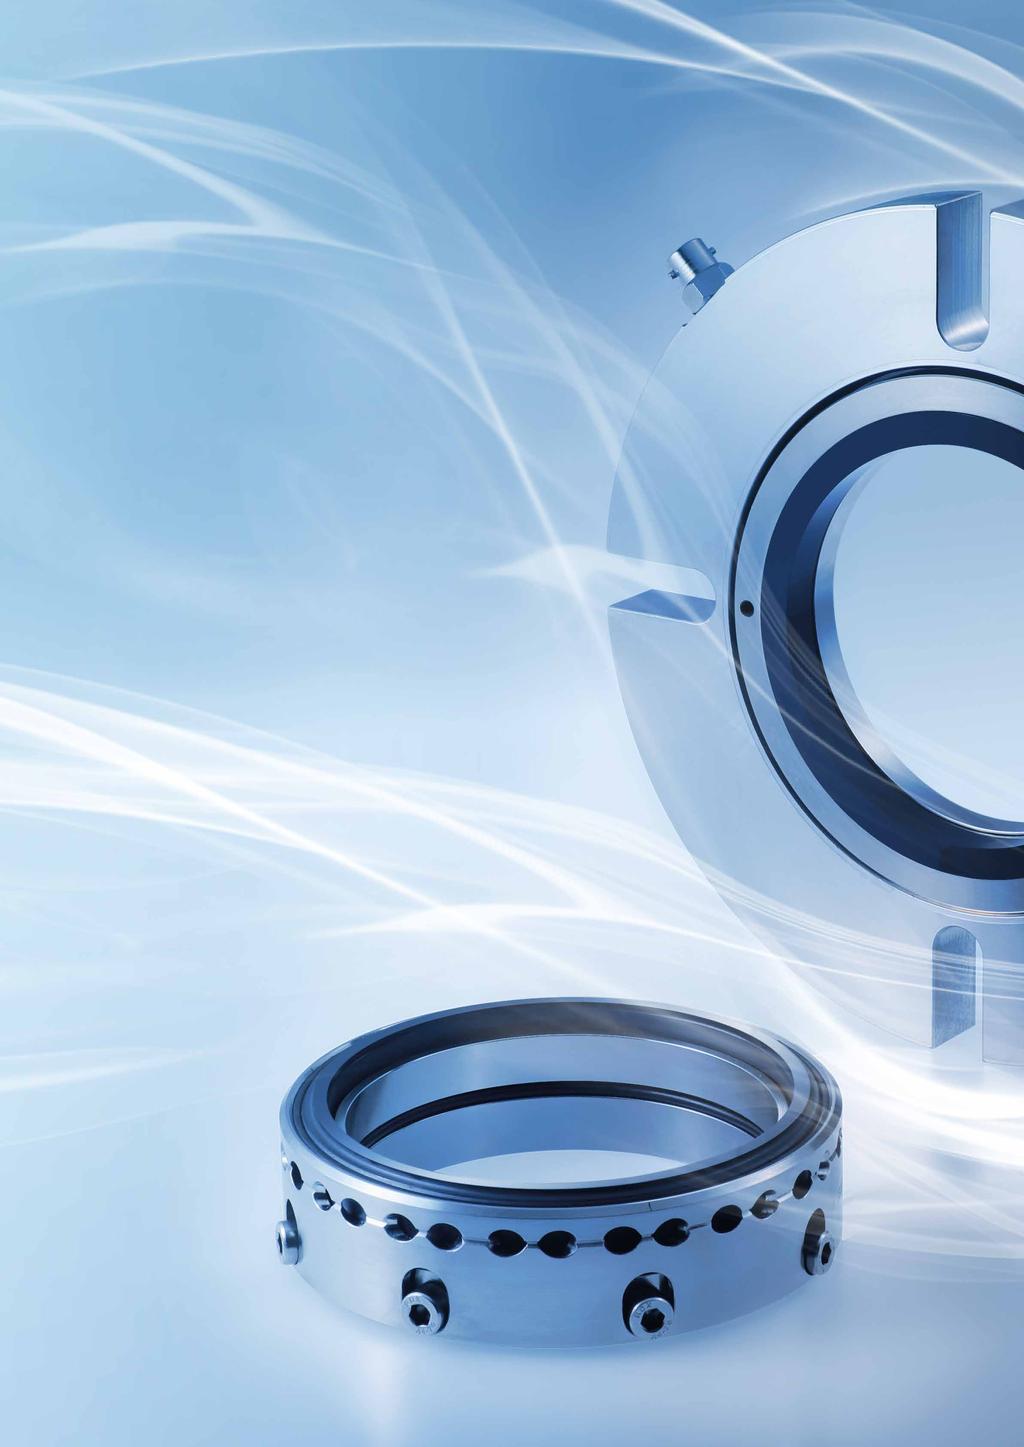 Full-range supplier: EagleBurgmann seals and supply systems for agitator applications. EagleBurgmann offers a fine-tuned portfolio that covers a wide range of applications.